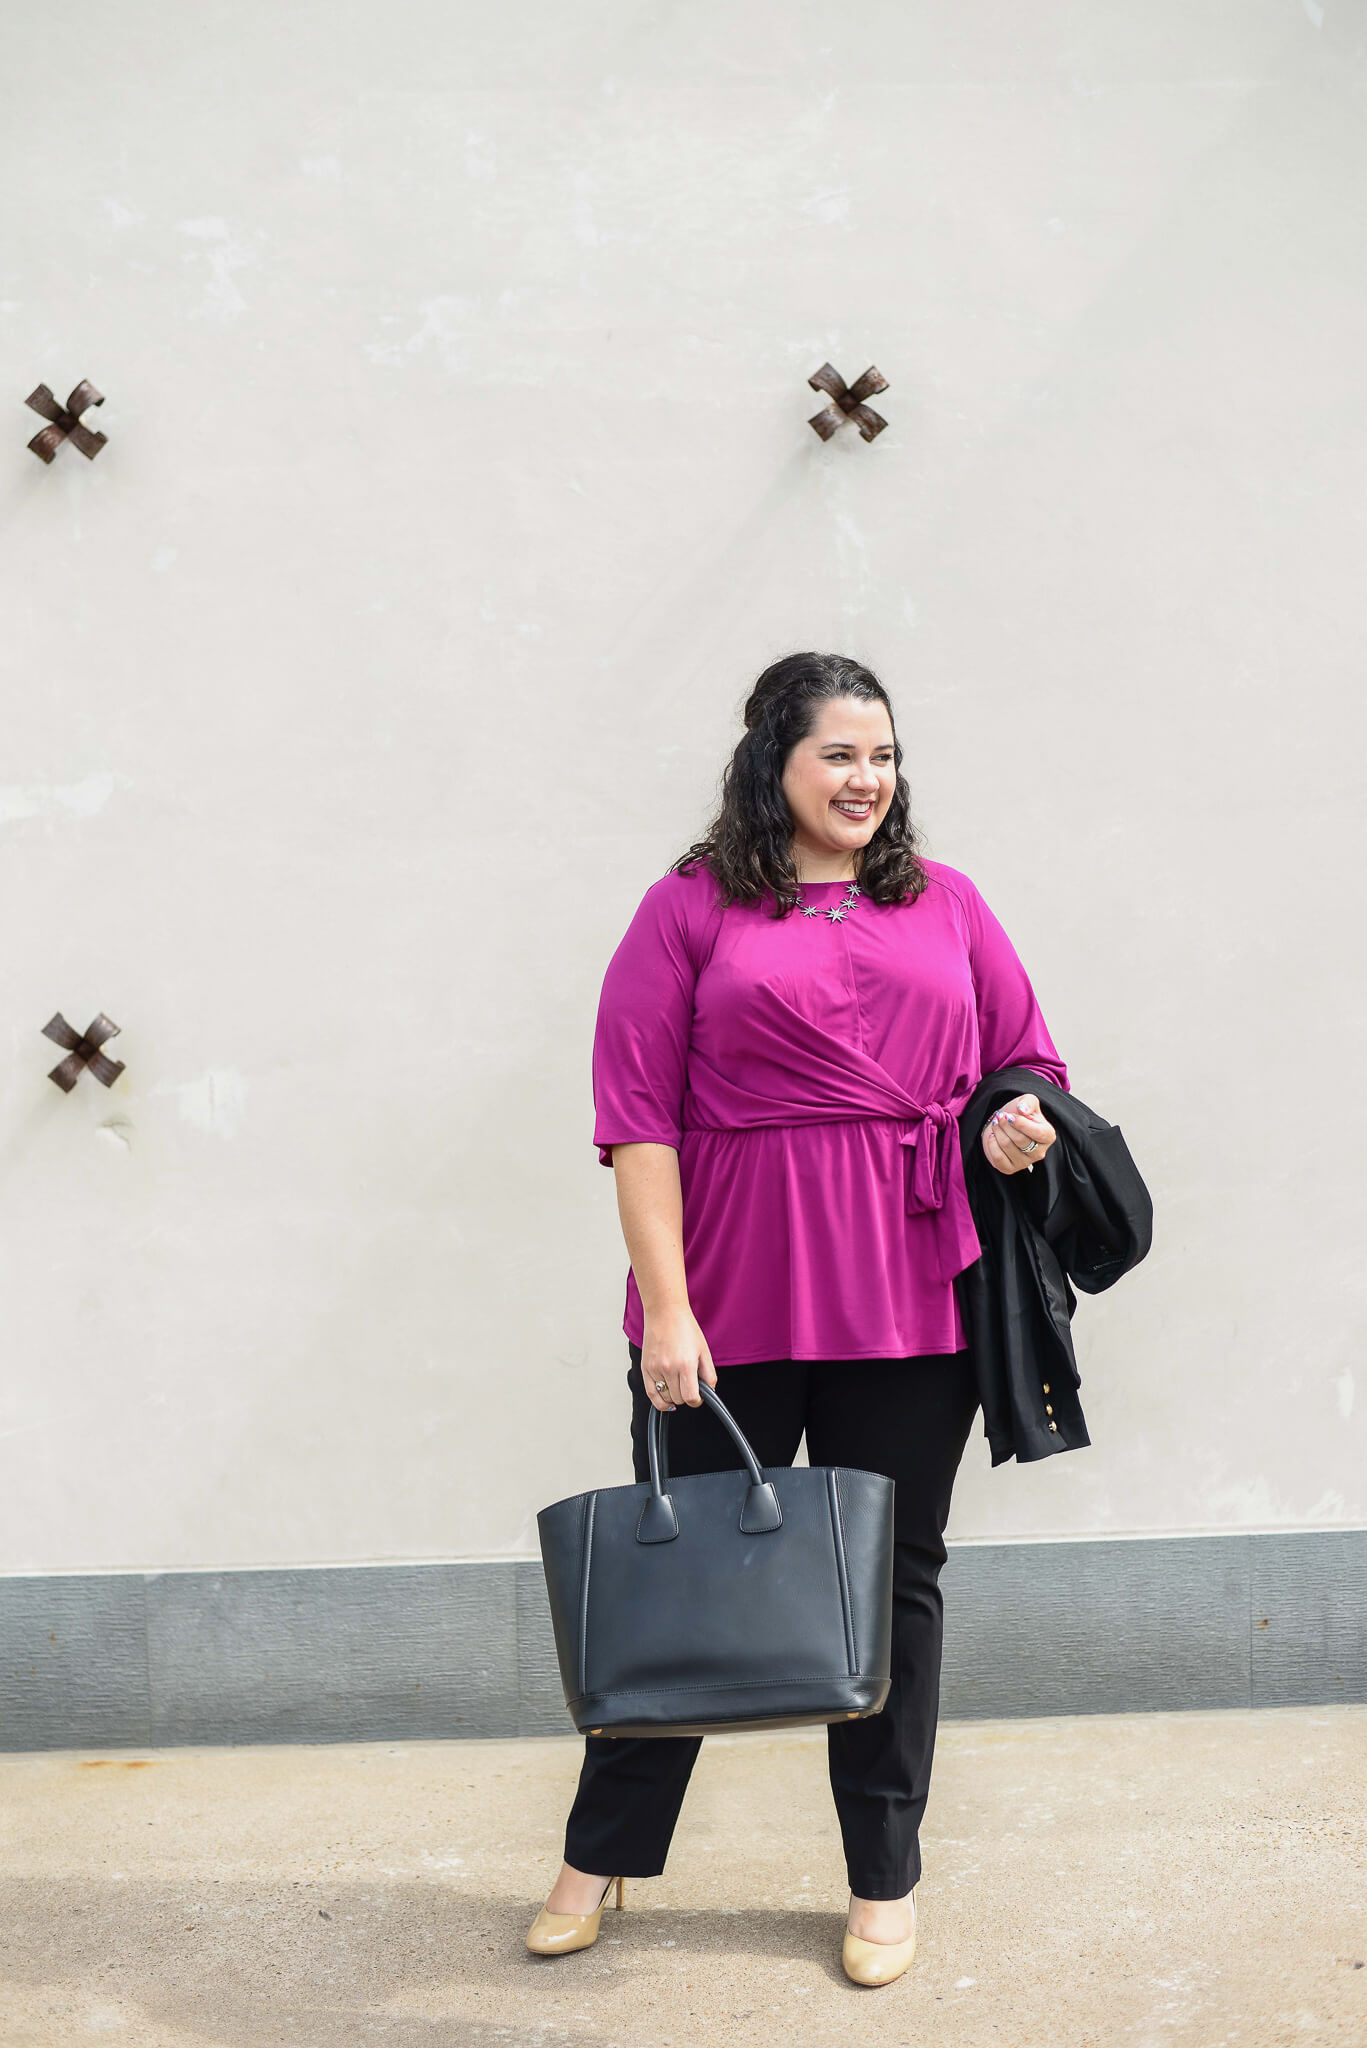 Going from business casual to business formal is super easy especially when you have great foundational pieces that can be mixed and matched. Lane Bryant has a great selection of workwear clothes that can take you from the boardroom to the bar. 